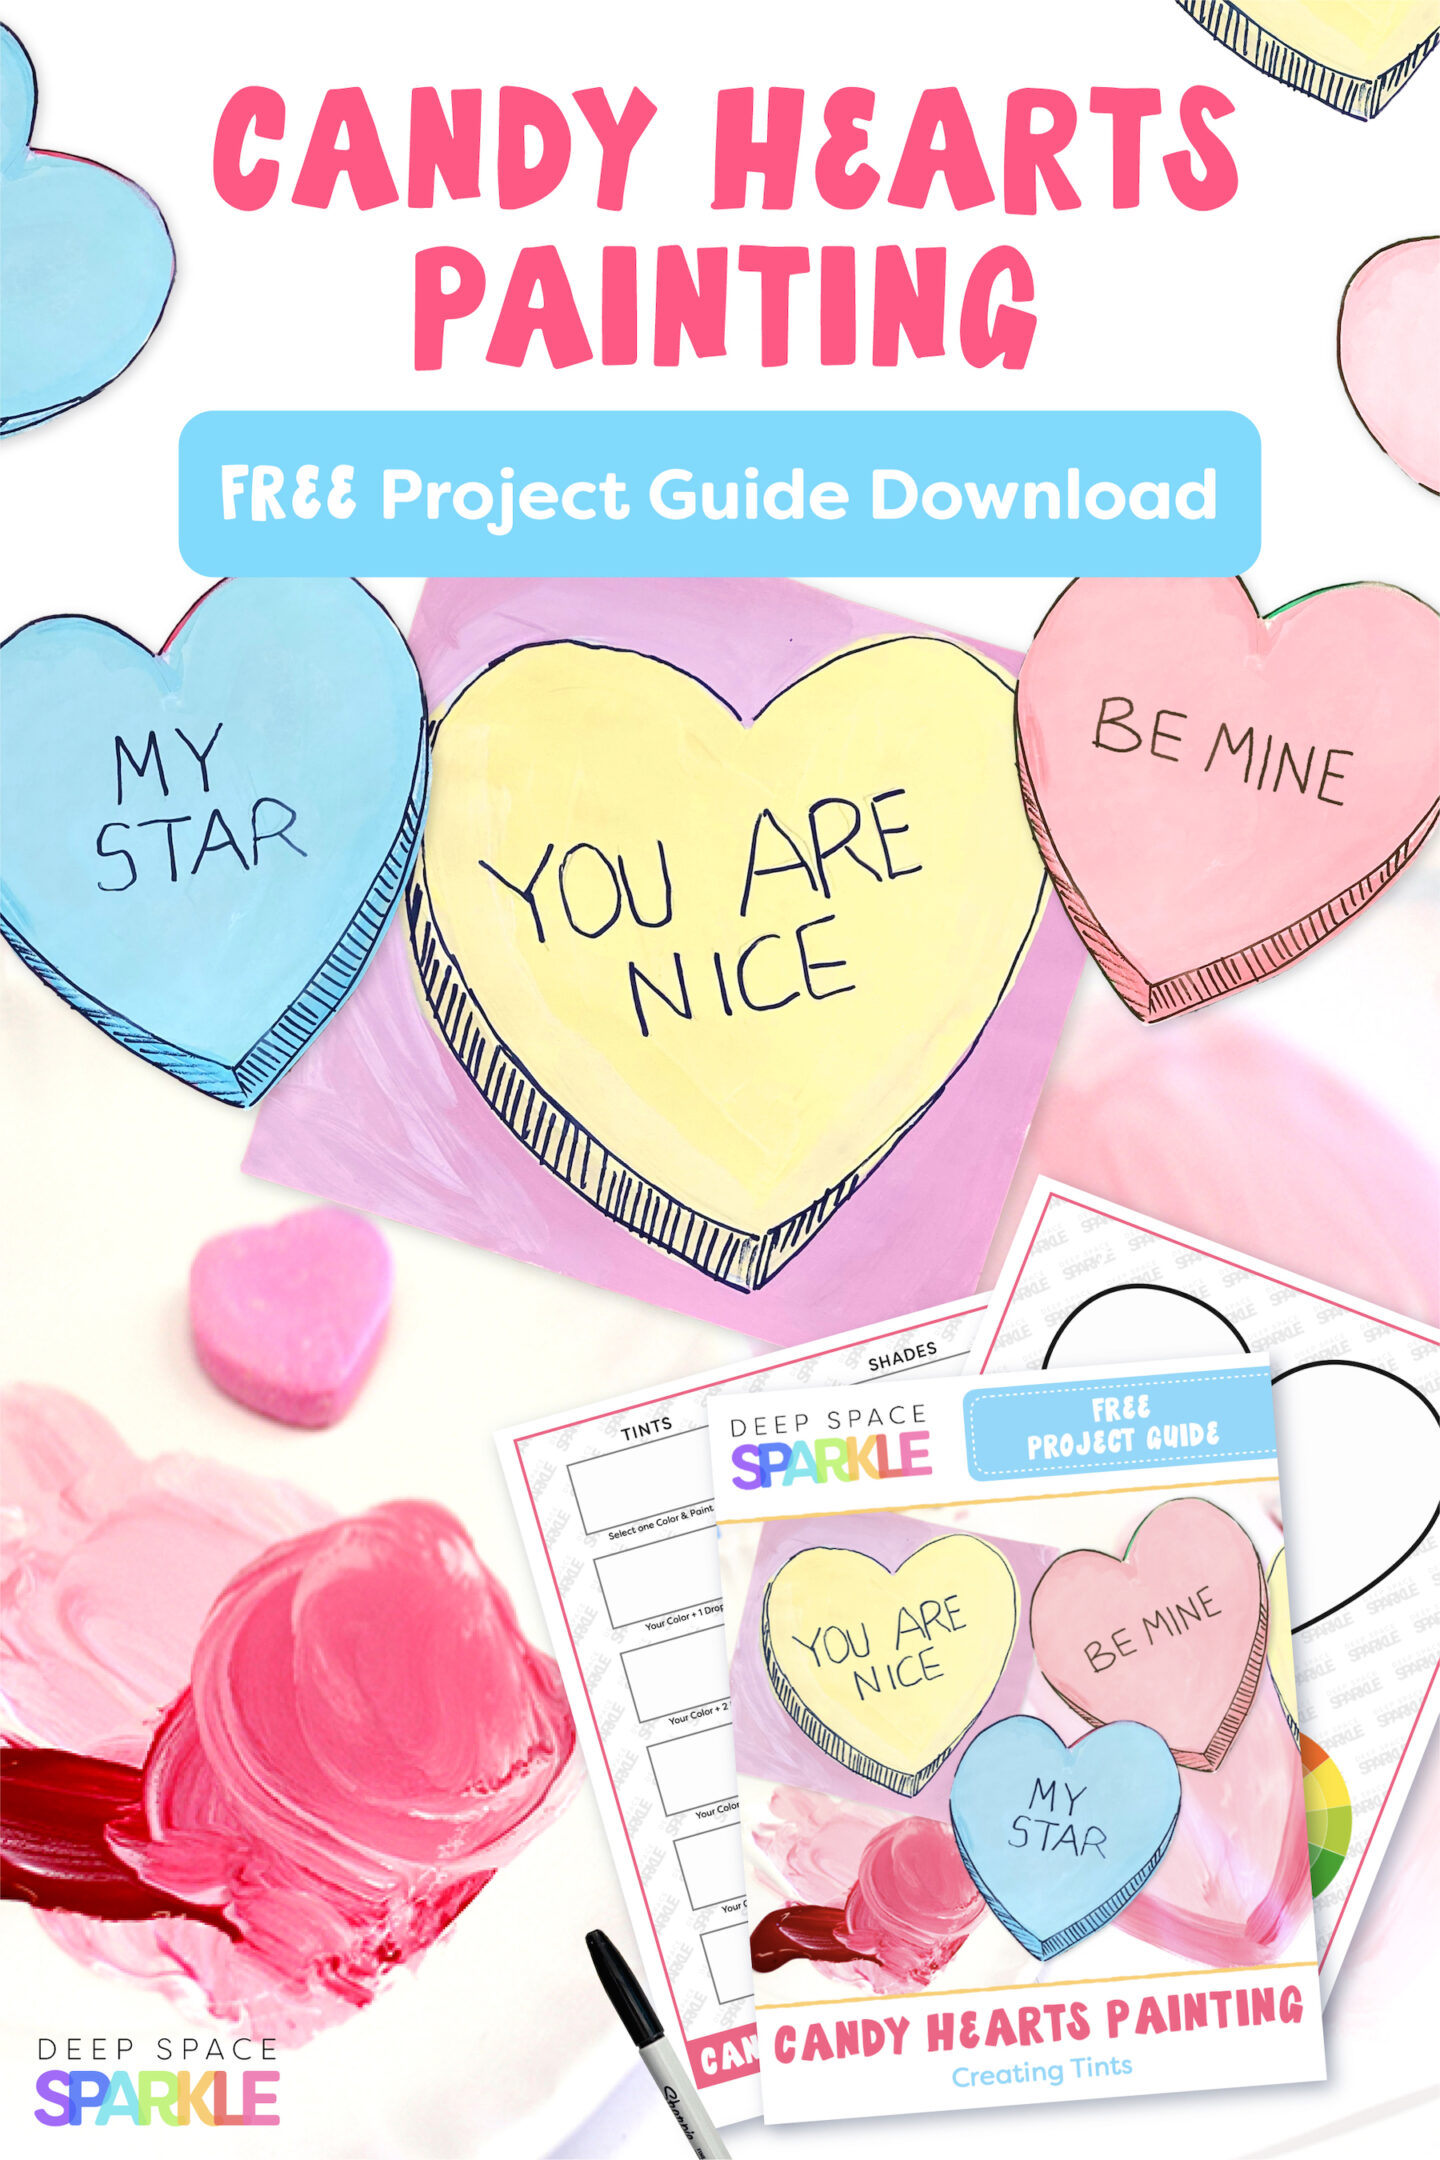 Candy Hearts Valentine's Day Art Project: Learn how to mix tints with free download